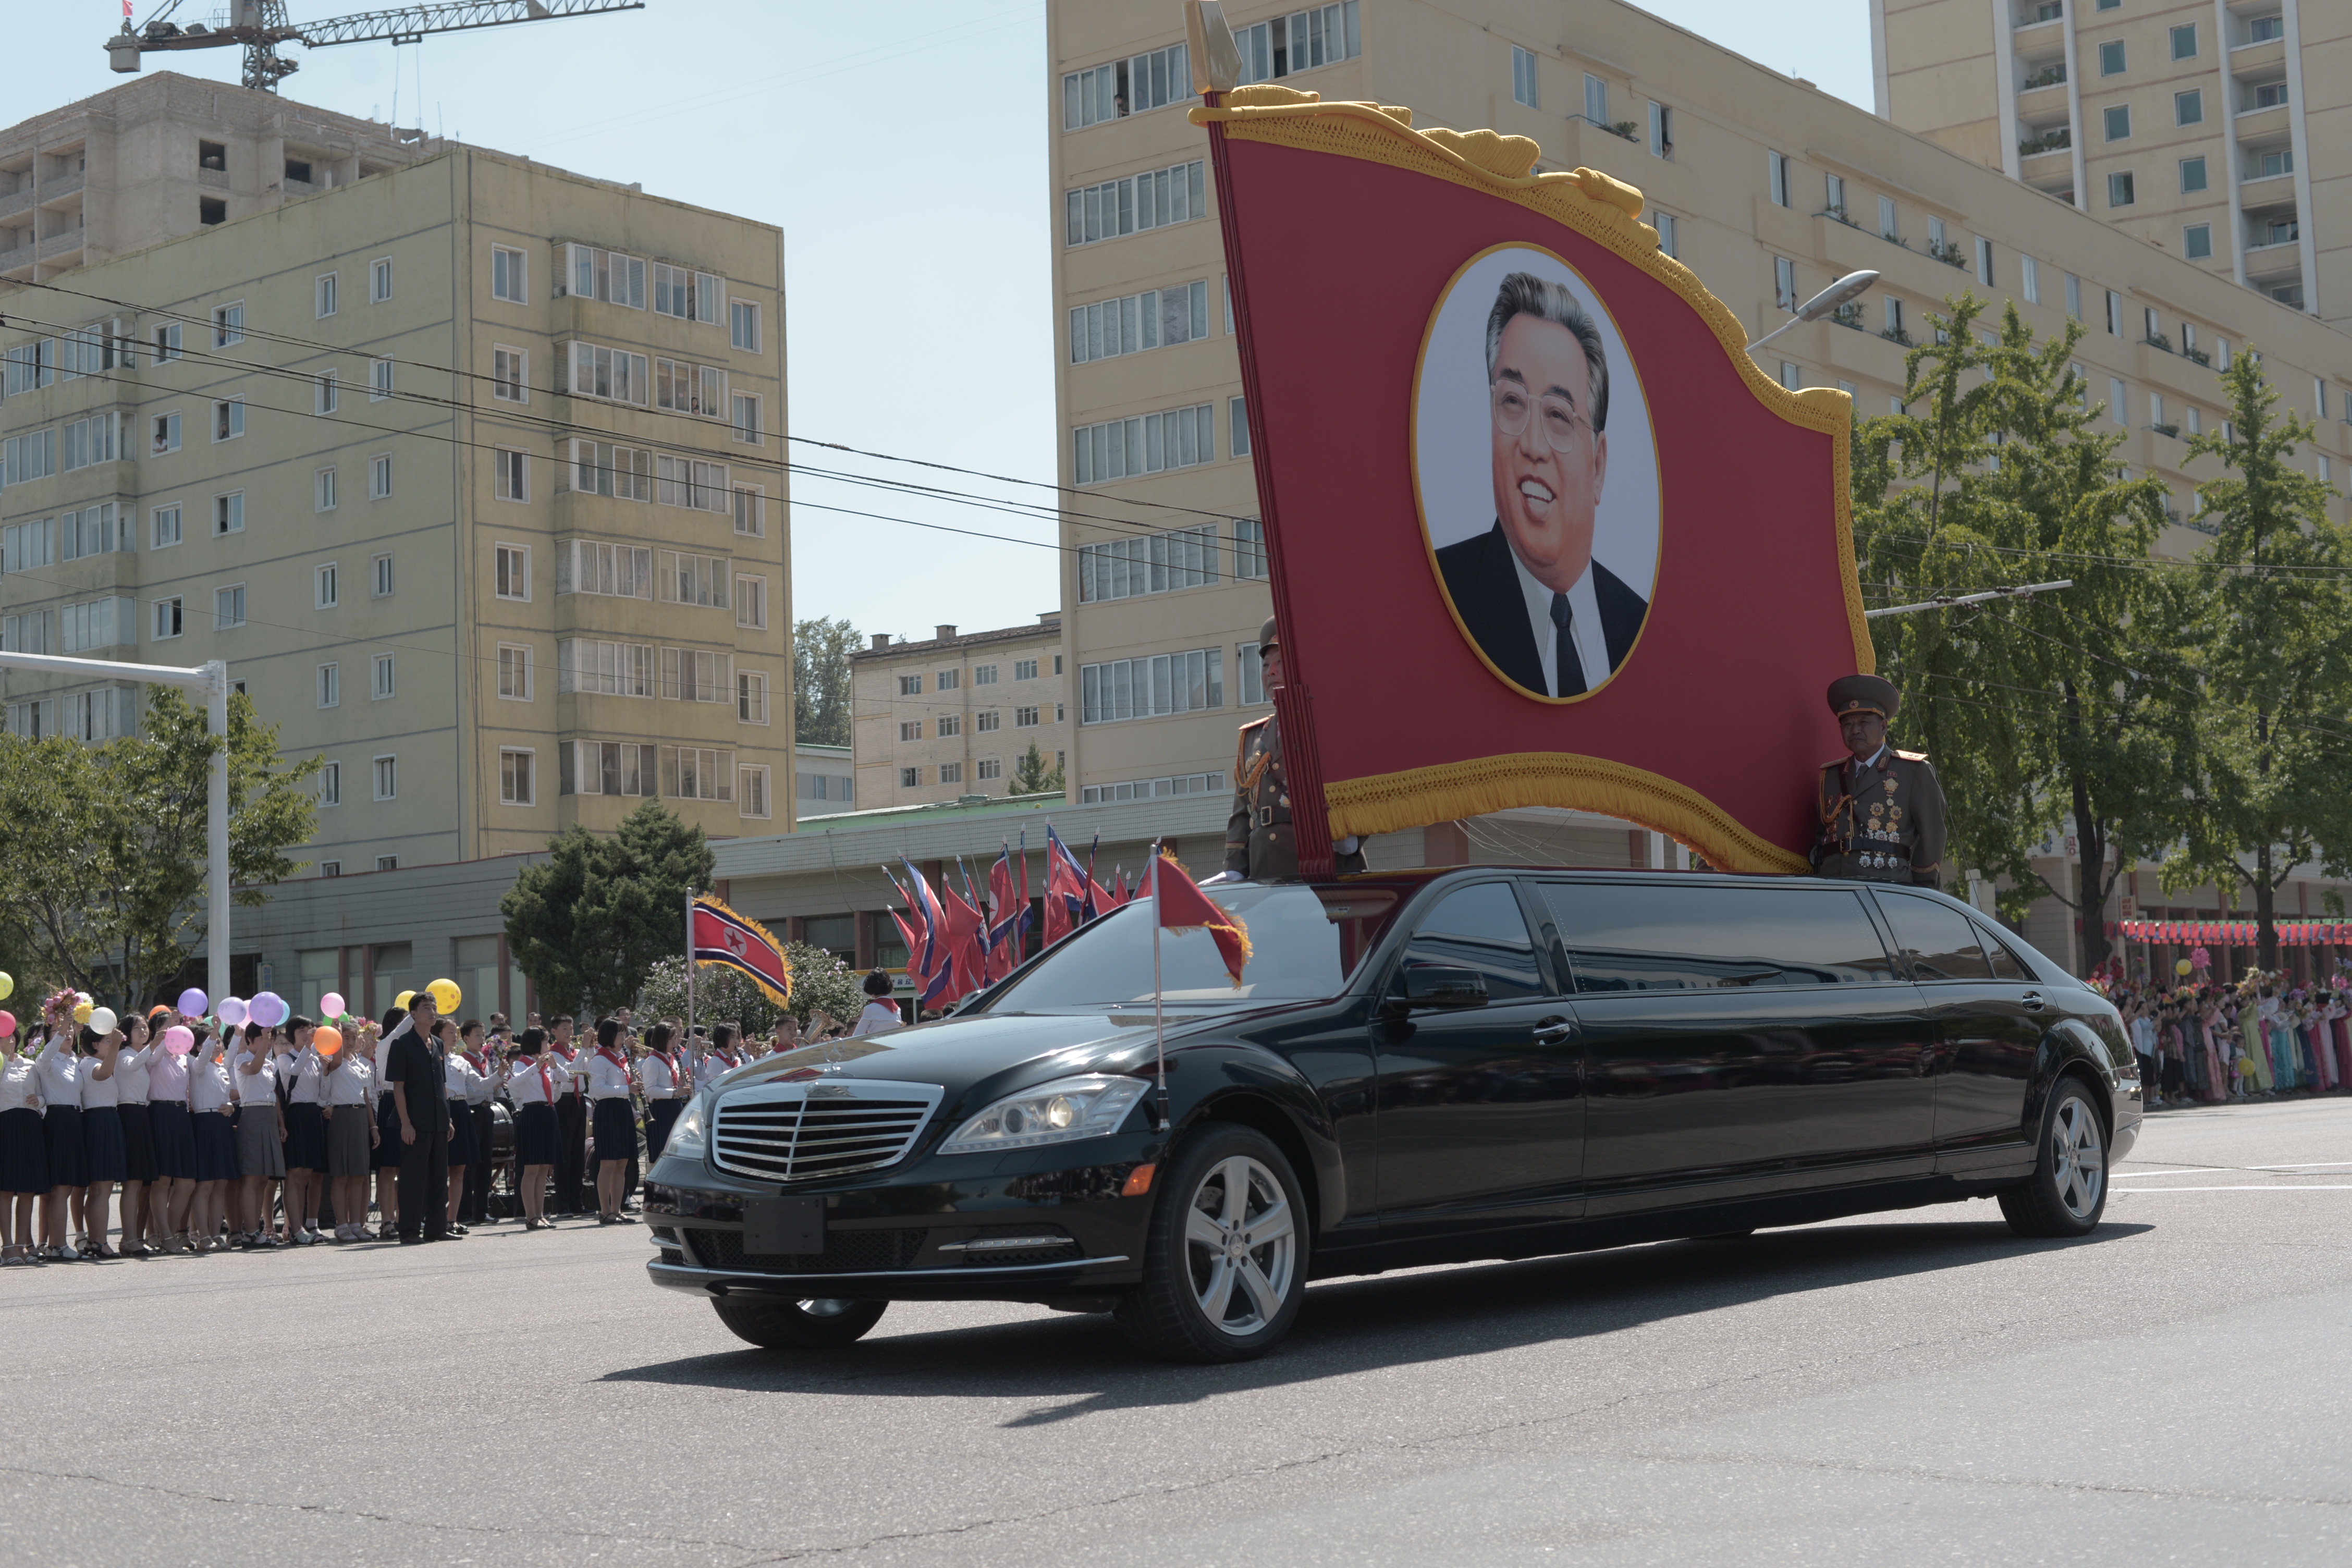 Limousine carrying a portrait of Kim Il-Sung, Eternal president of the DPRK